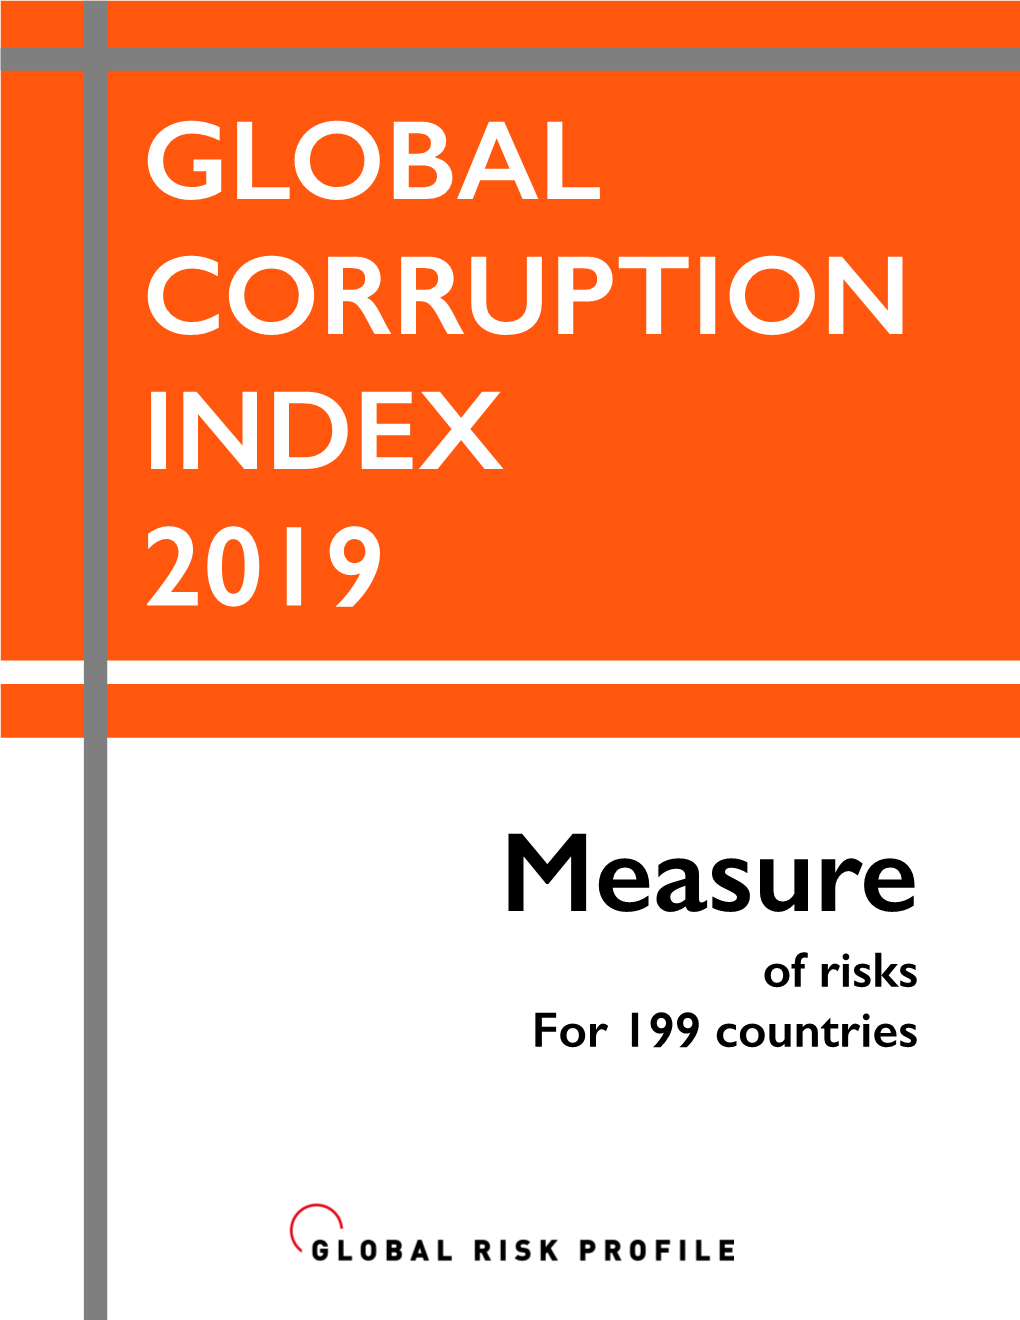 Of Risks for 199 Countries